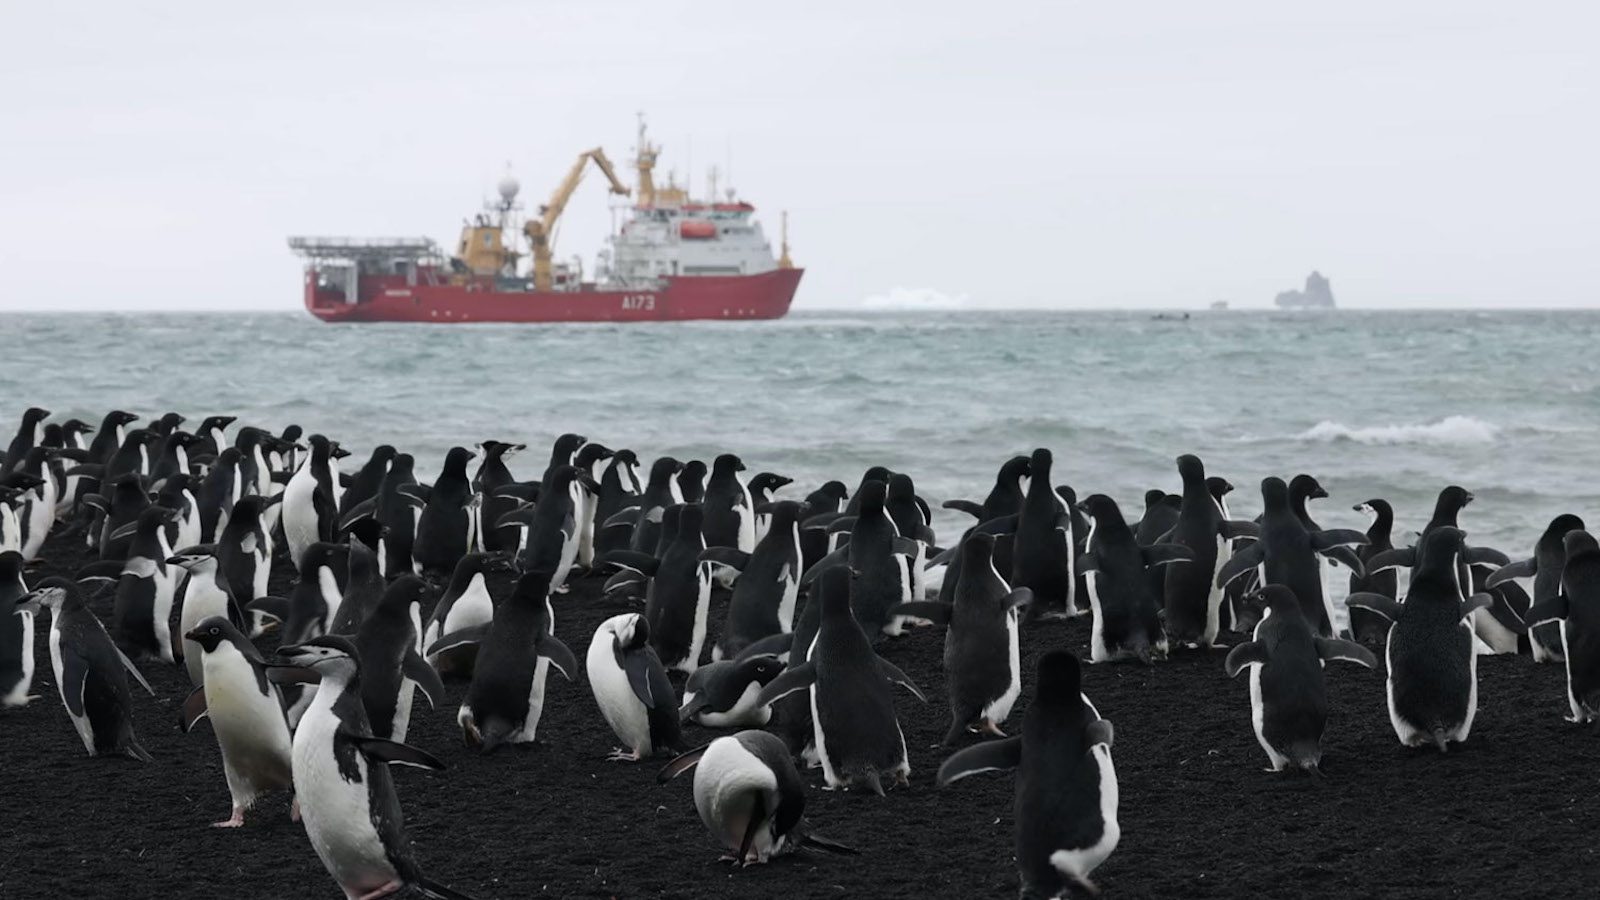 Royal Navy Makes Rare Visit to Remote South Atlantic Island Chain to Study Penguins